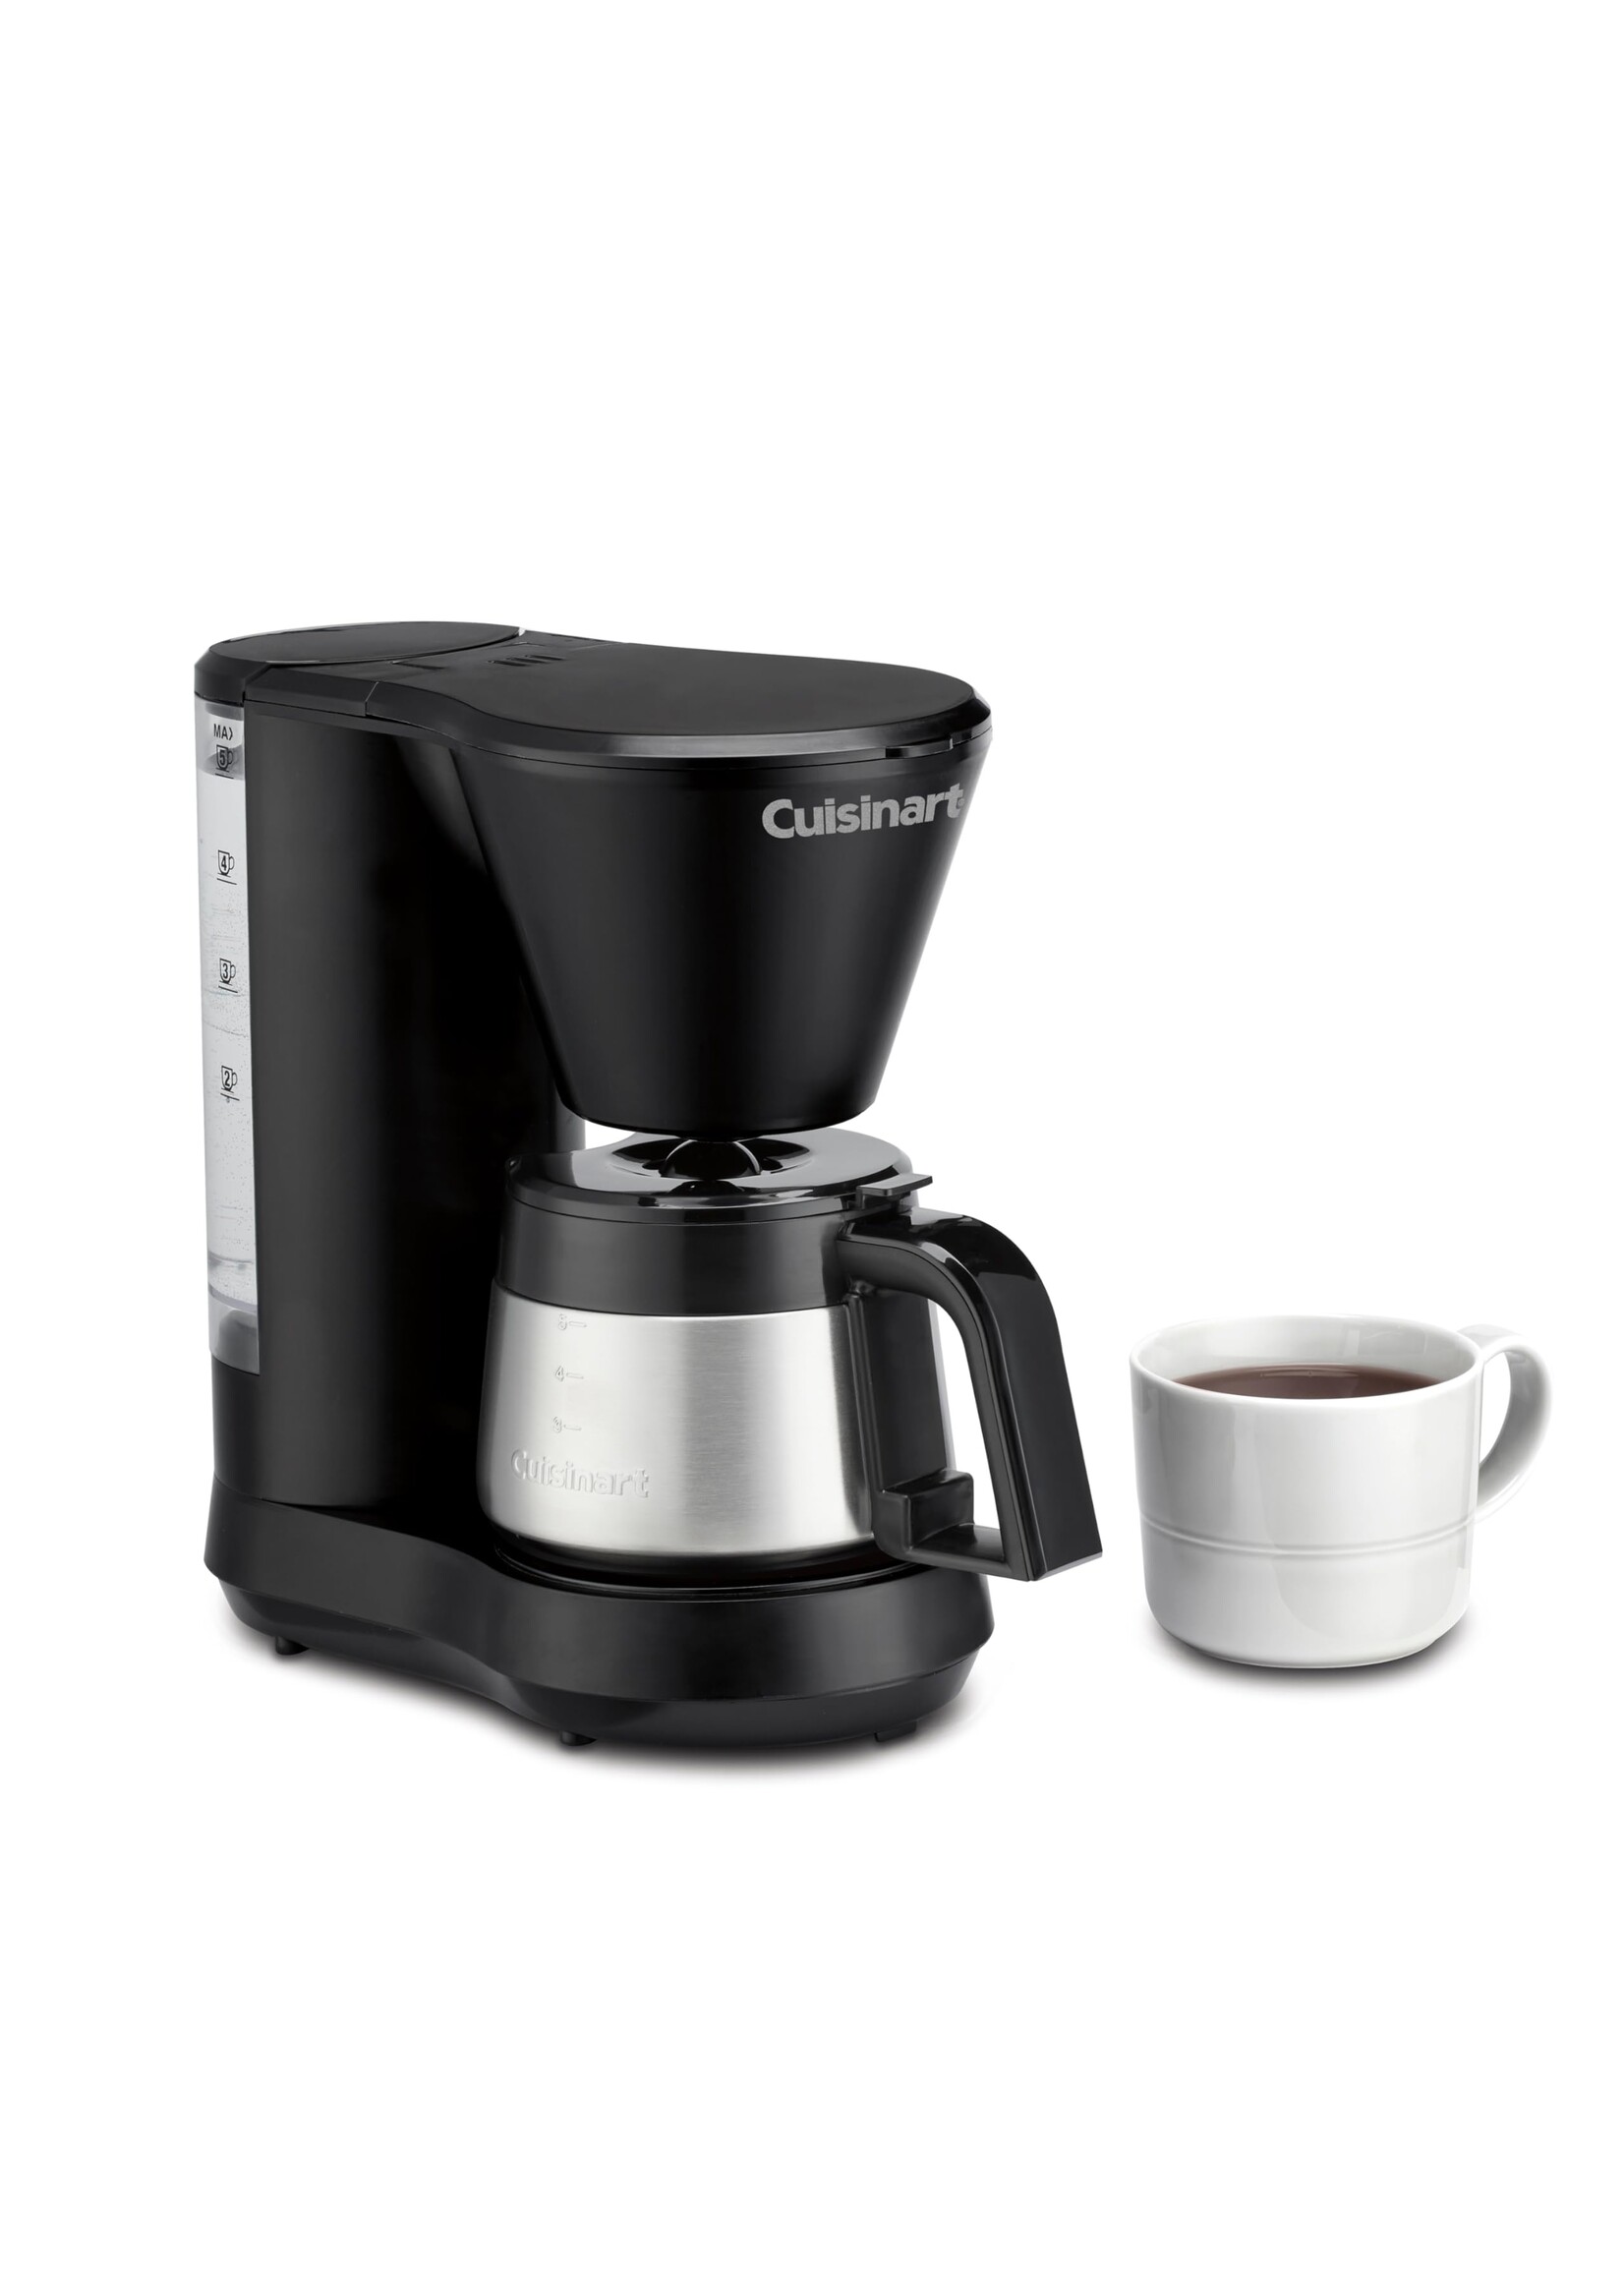 CUISINART DCC-5570C - CUISINART CAFETIERE 5T CARAFE STAINLESS